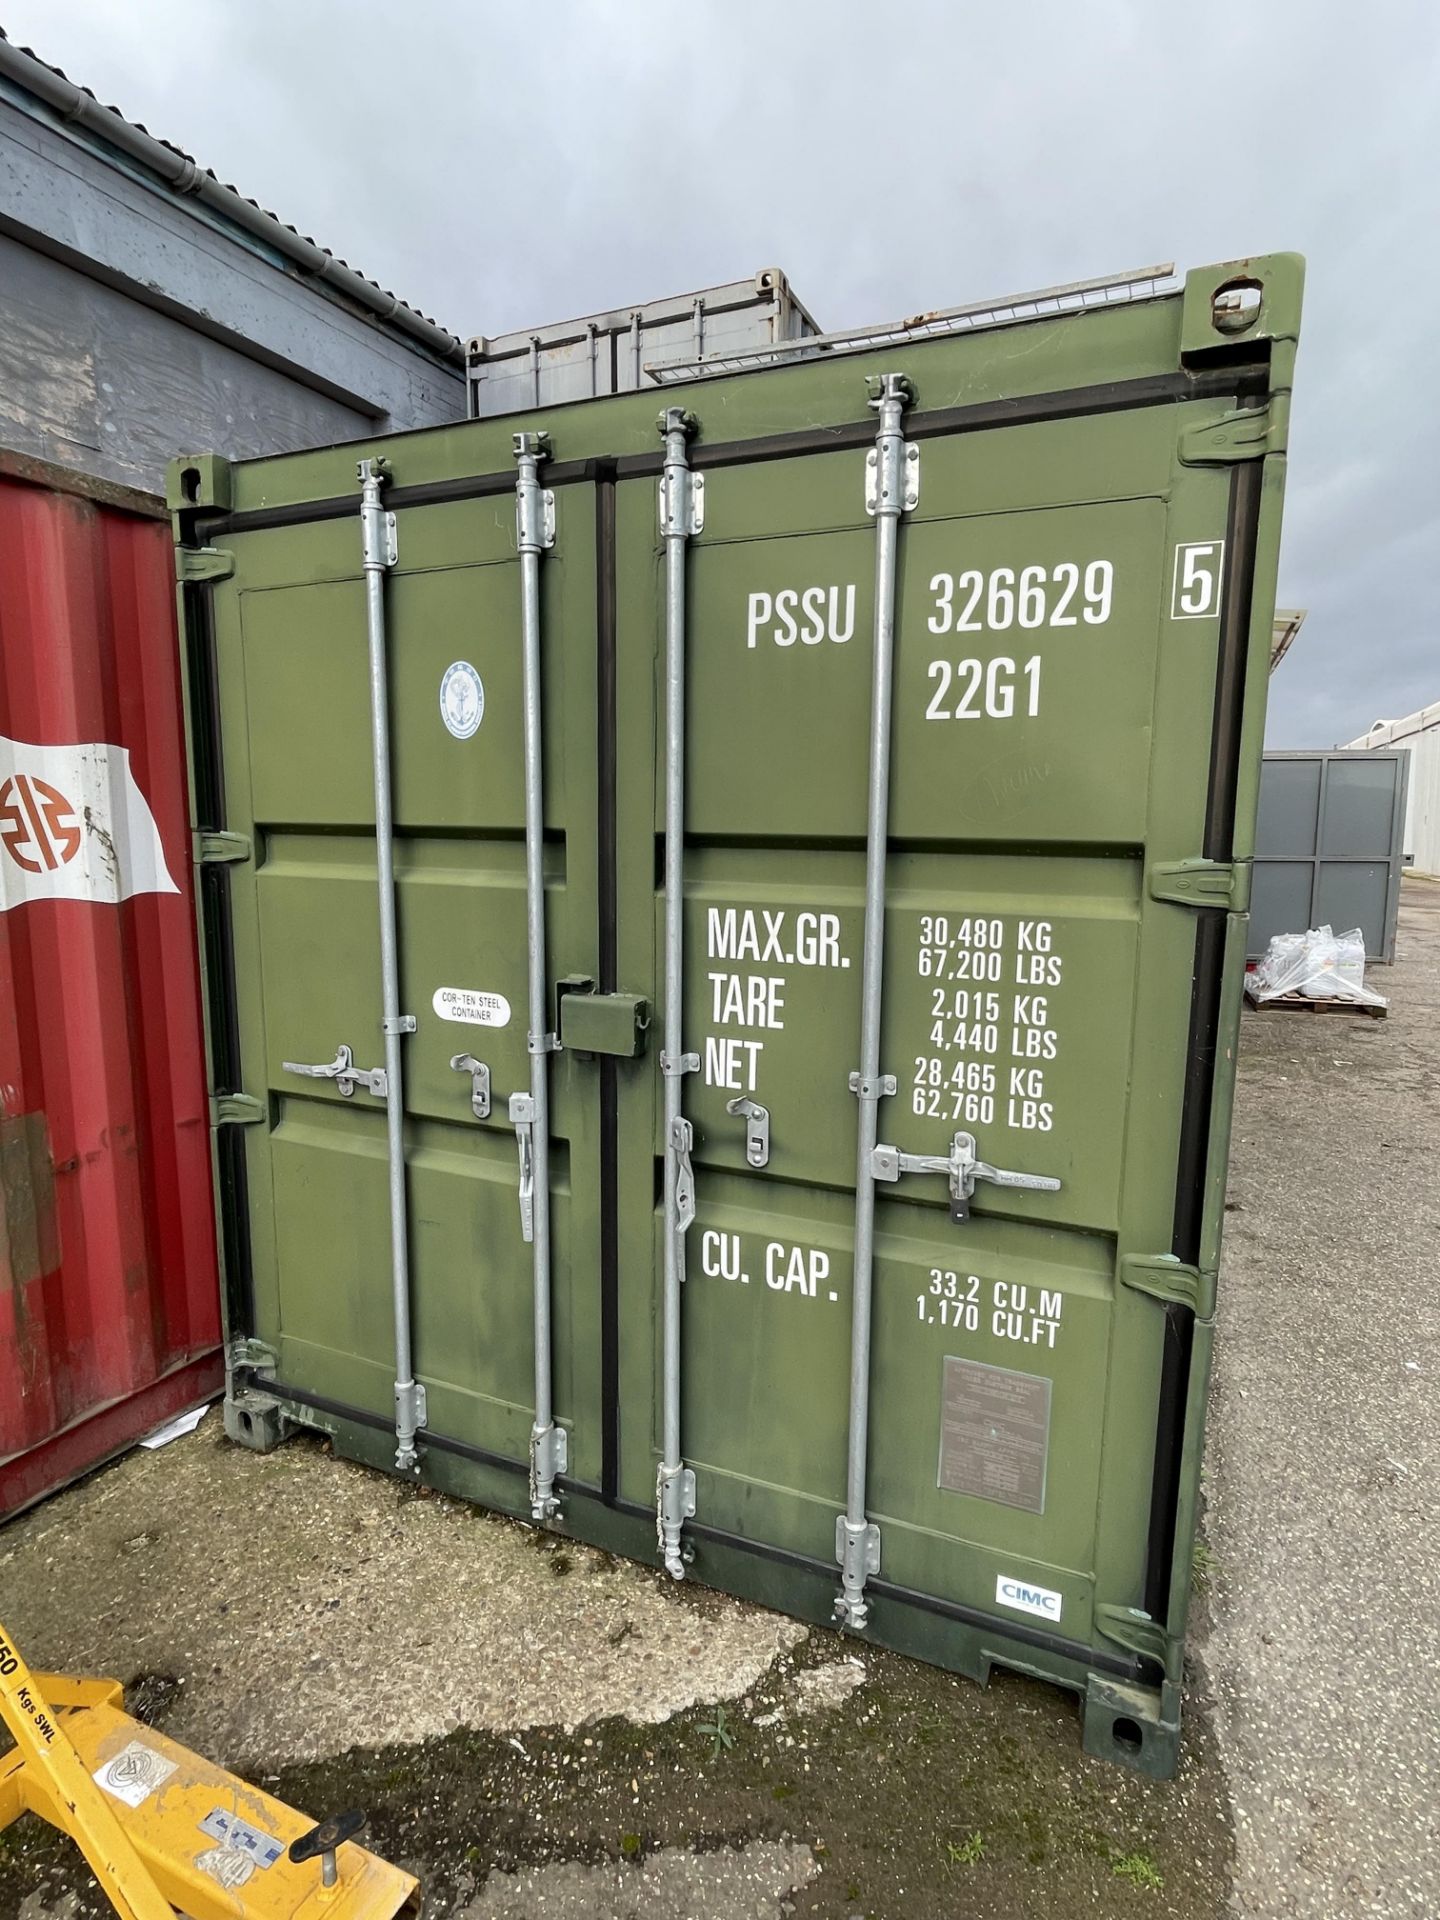 2013 CIMC Type CB22-0803 20' Shipping Container S/No. PSSU3266295 (Contents Excluded) - Image 2 of 5